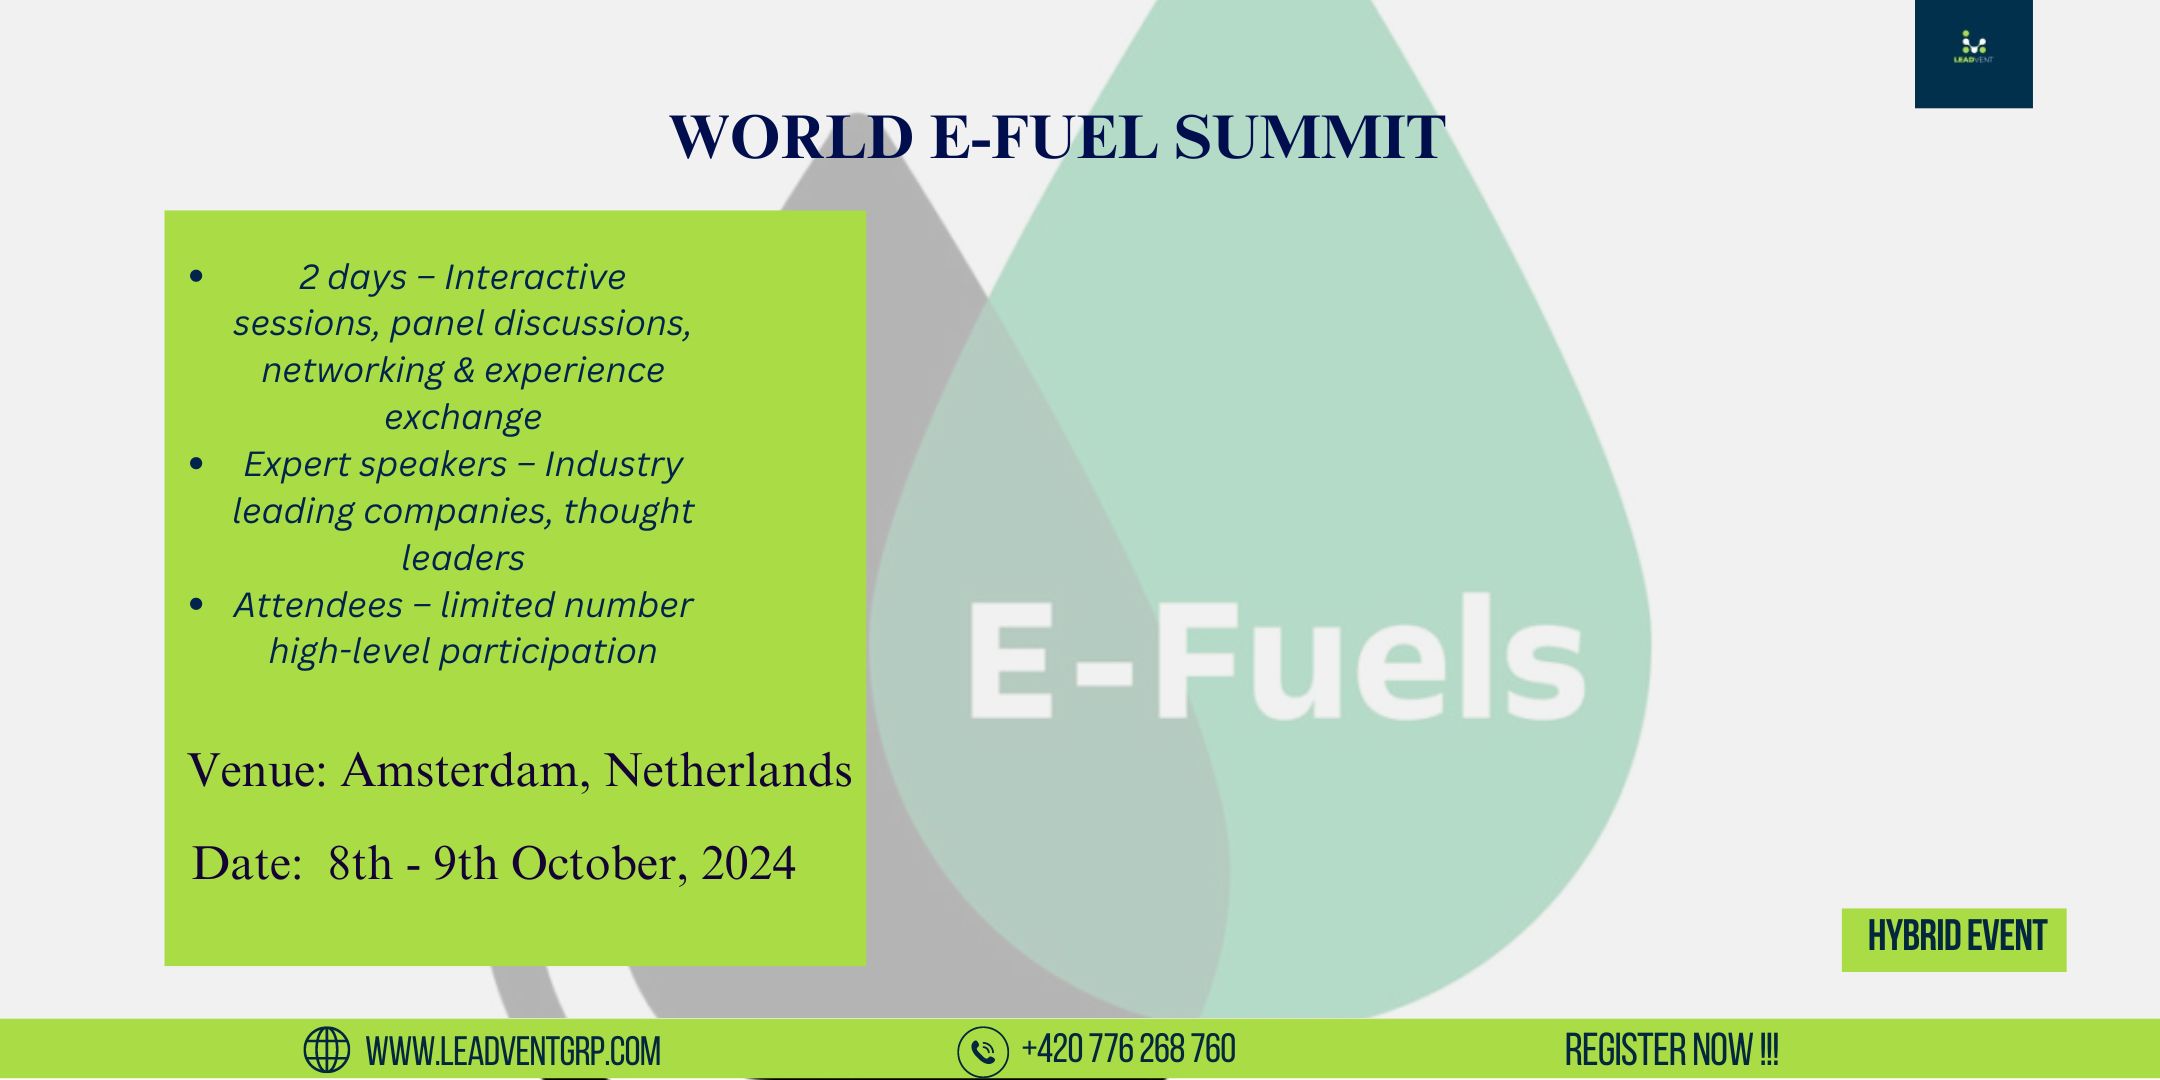 World E-Fuel Summit organized by Leadvent Group